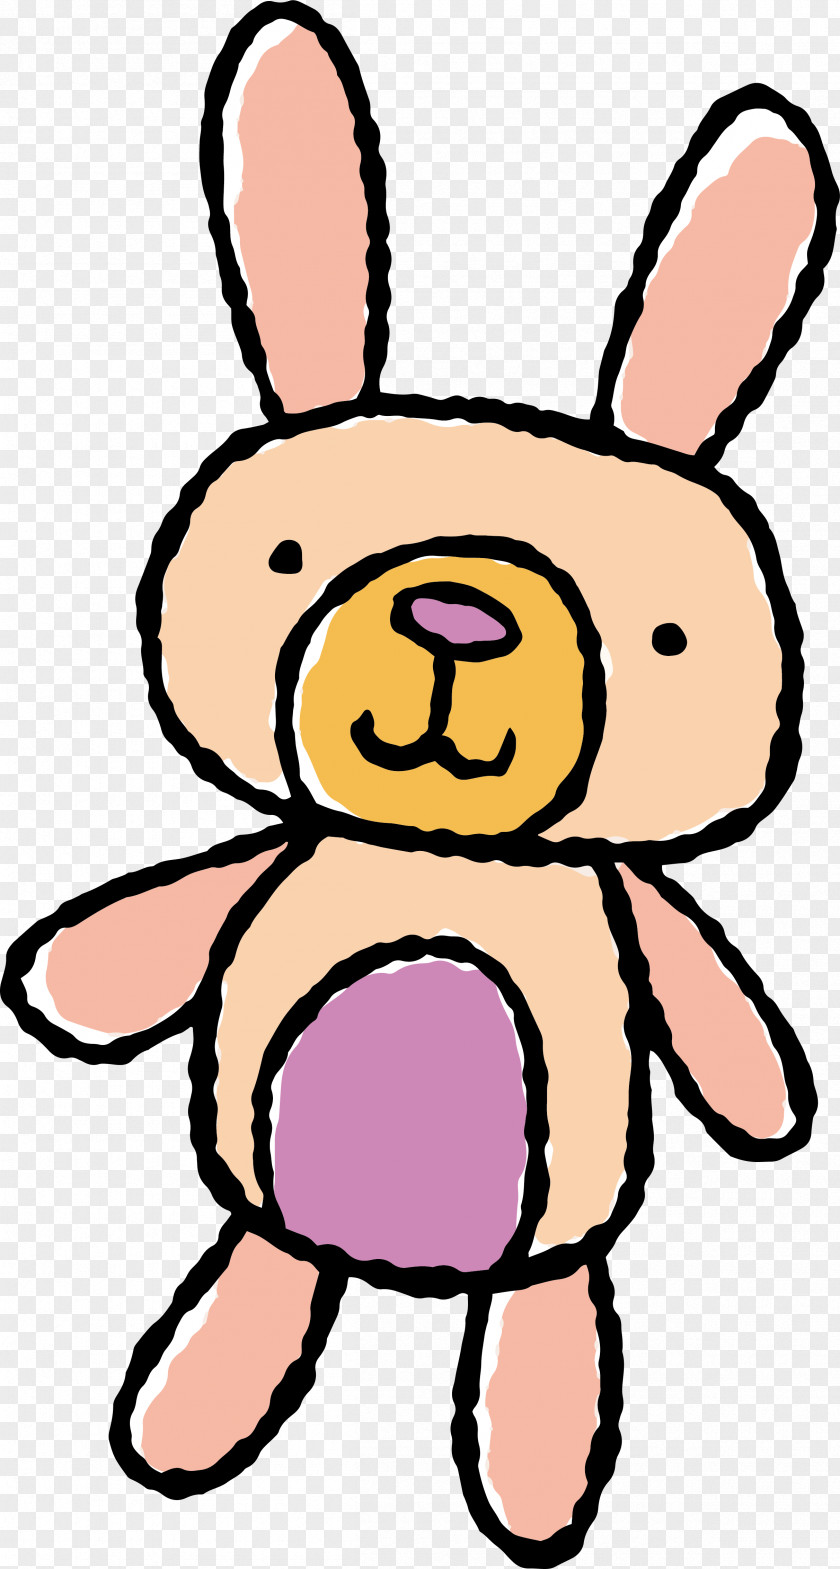 Cute Bunny Toys Rabbit Watercolor Painting PNG